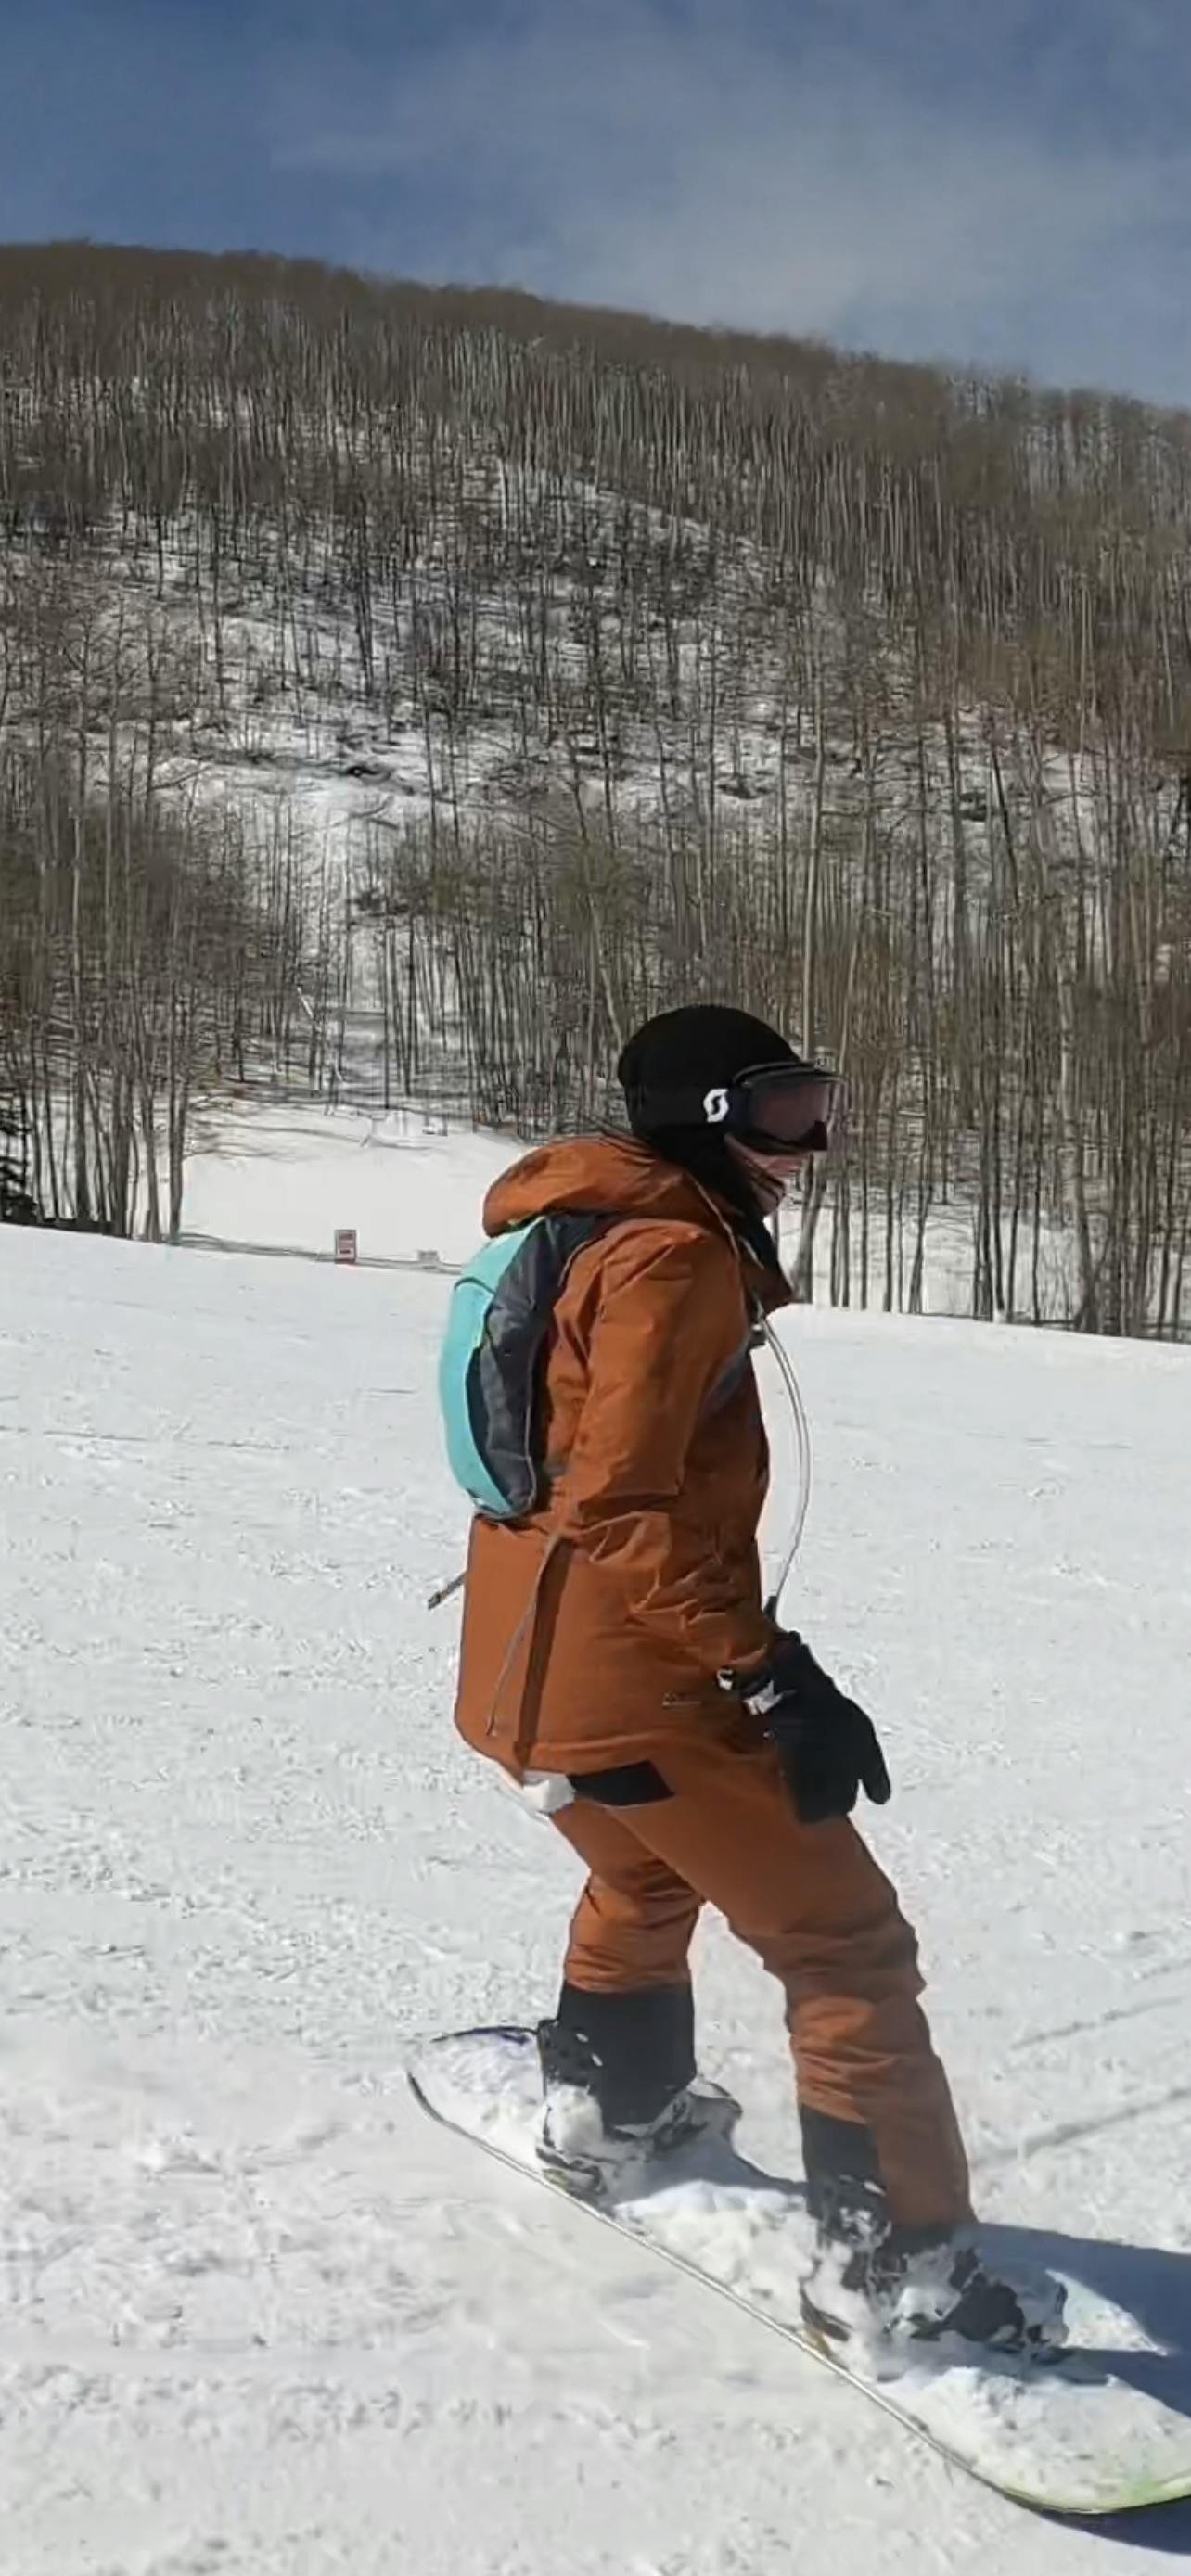 A woman with torn snowboard pants snowboards down a hill.